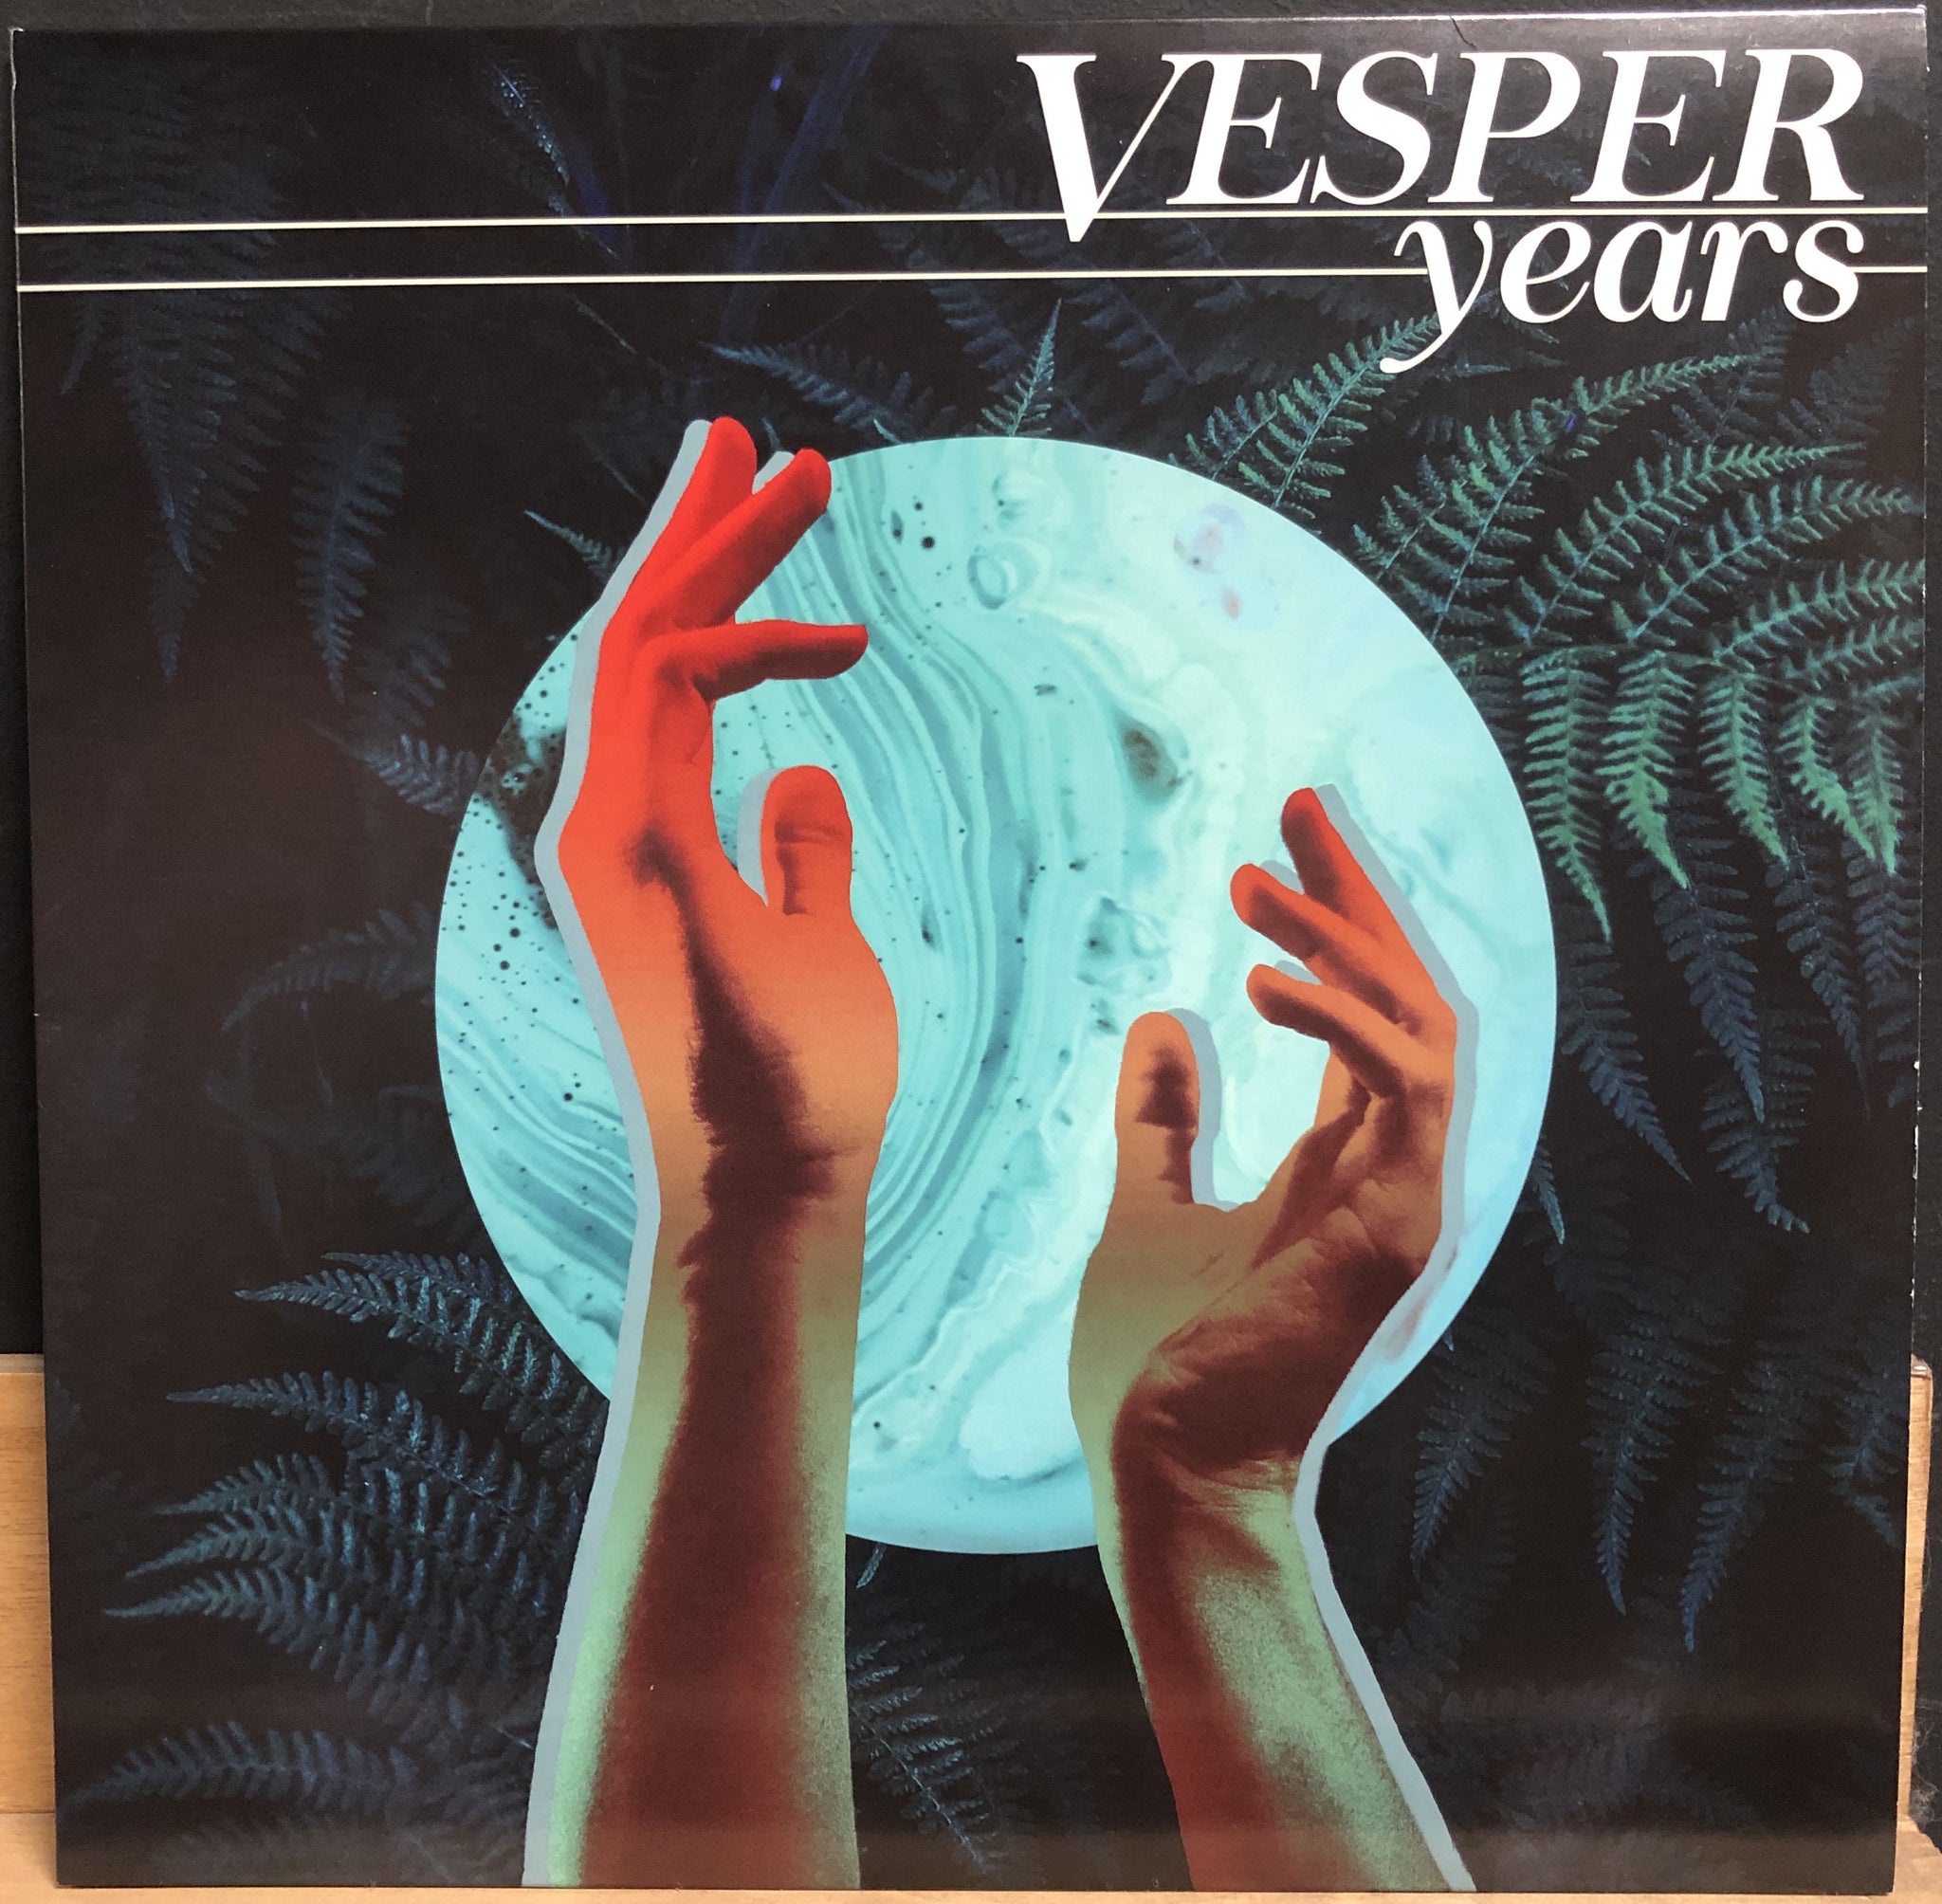 Vesper ‎– Years - New Lp Record 2019 Shuga / Wax Mage Exclusive Vinyl #21/26 - Synth-pop / Electronic